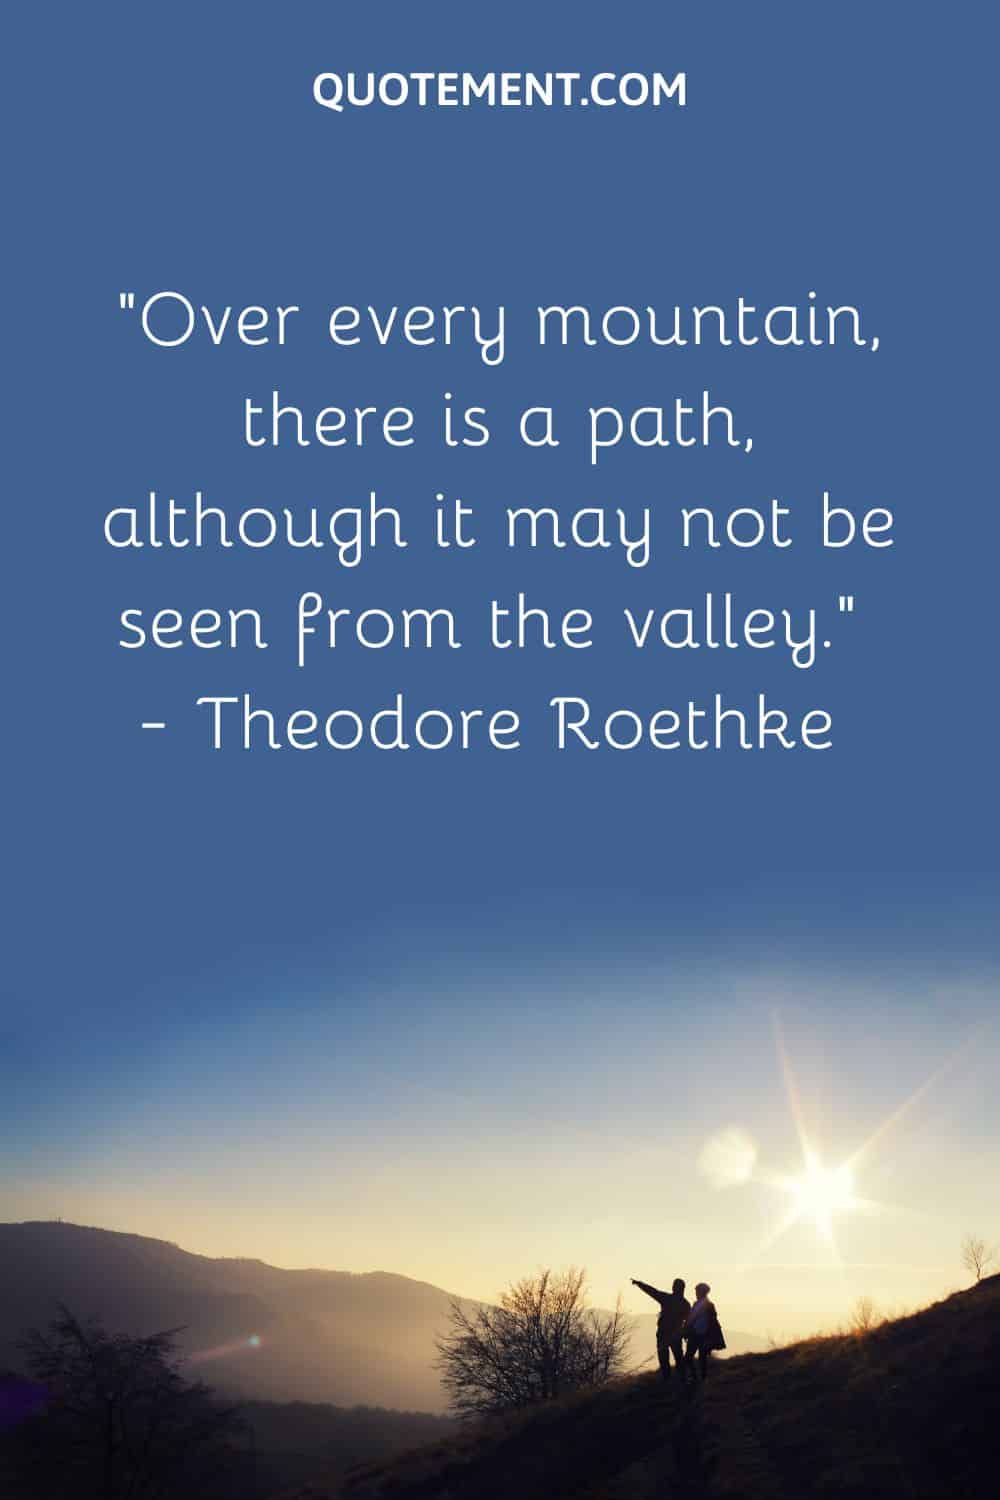 “Over every mountain, there is a path, although it may not be seen from the valley.” — Theodore Roethke